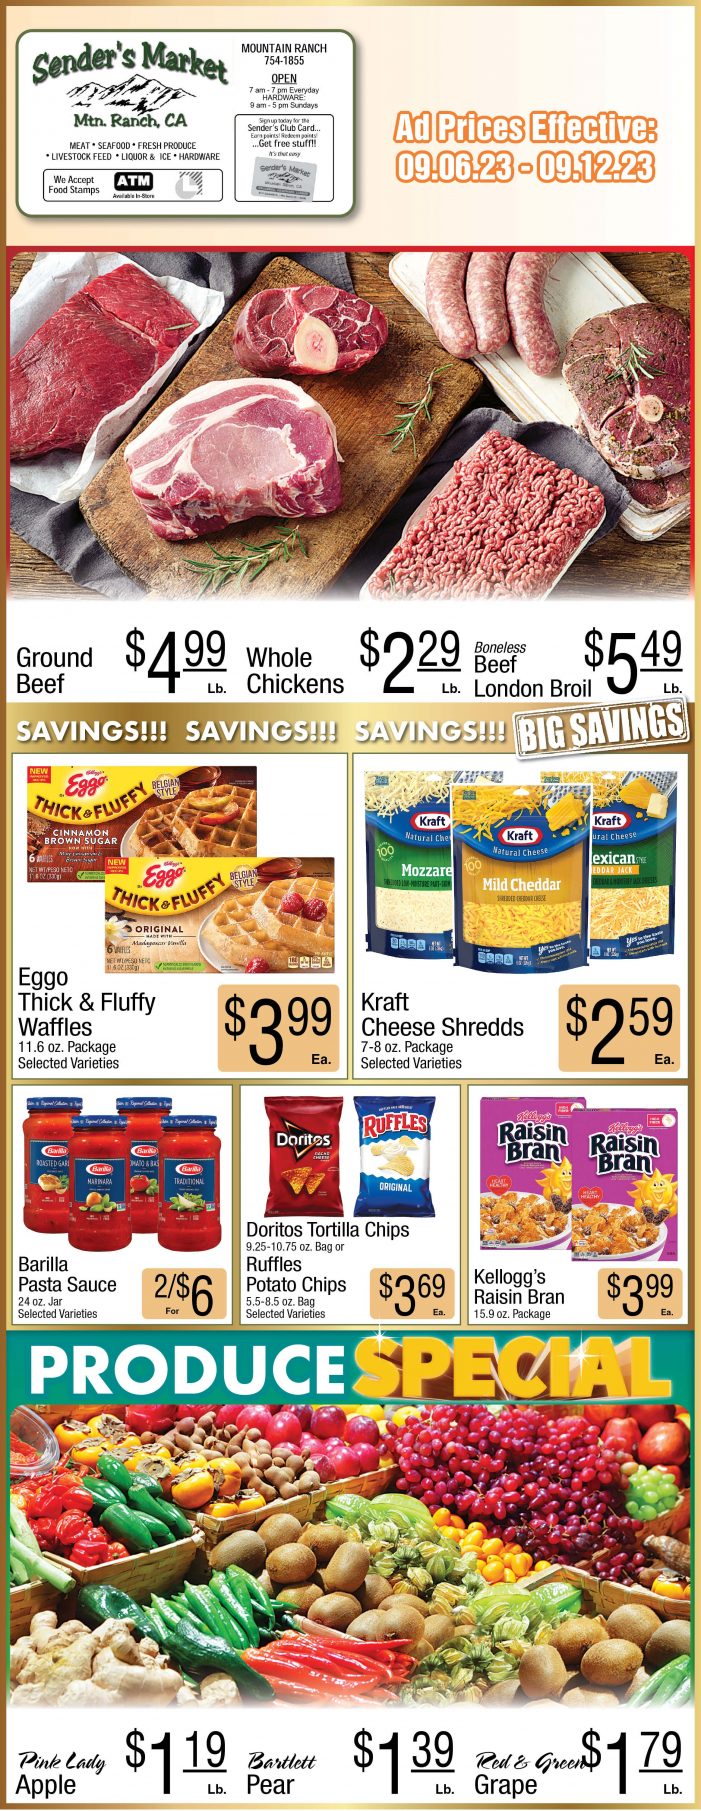 Sender’s Market Weekly Ad & Grocery Specials Through September 12th! Shop Local & Save!!